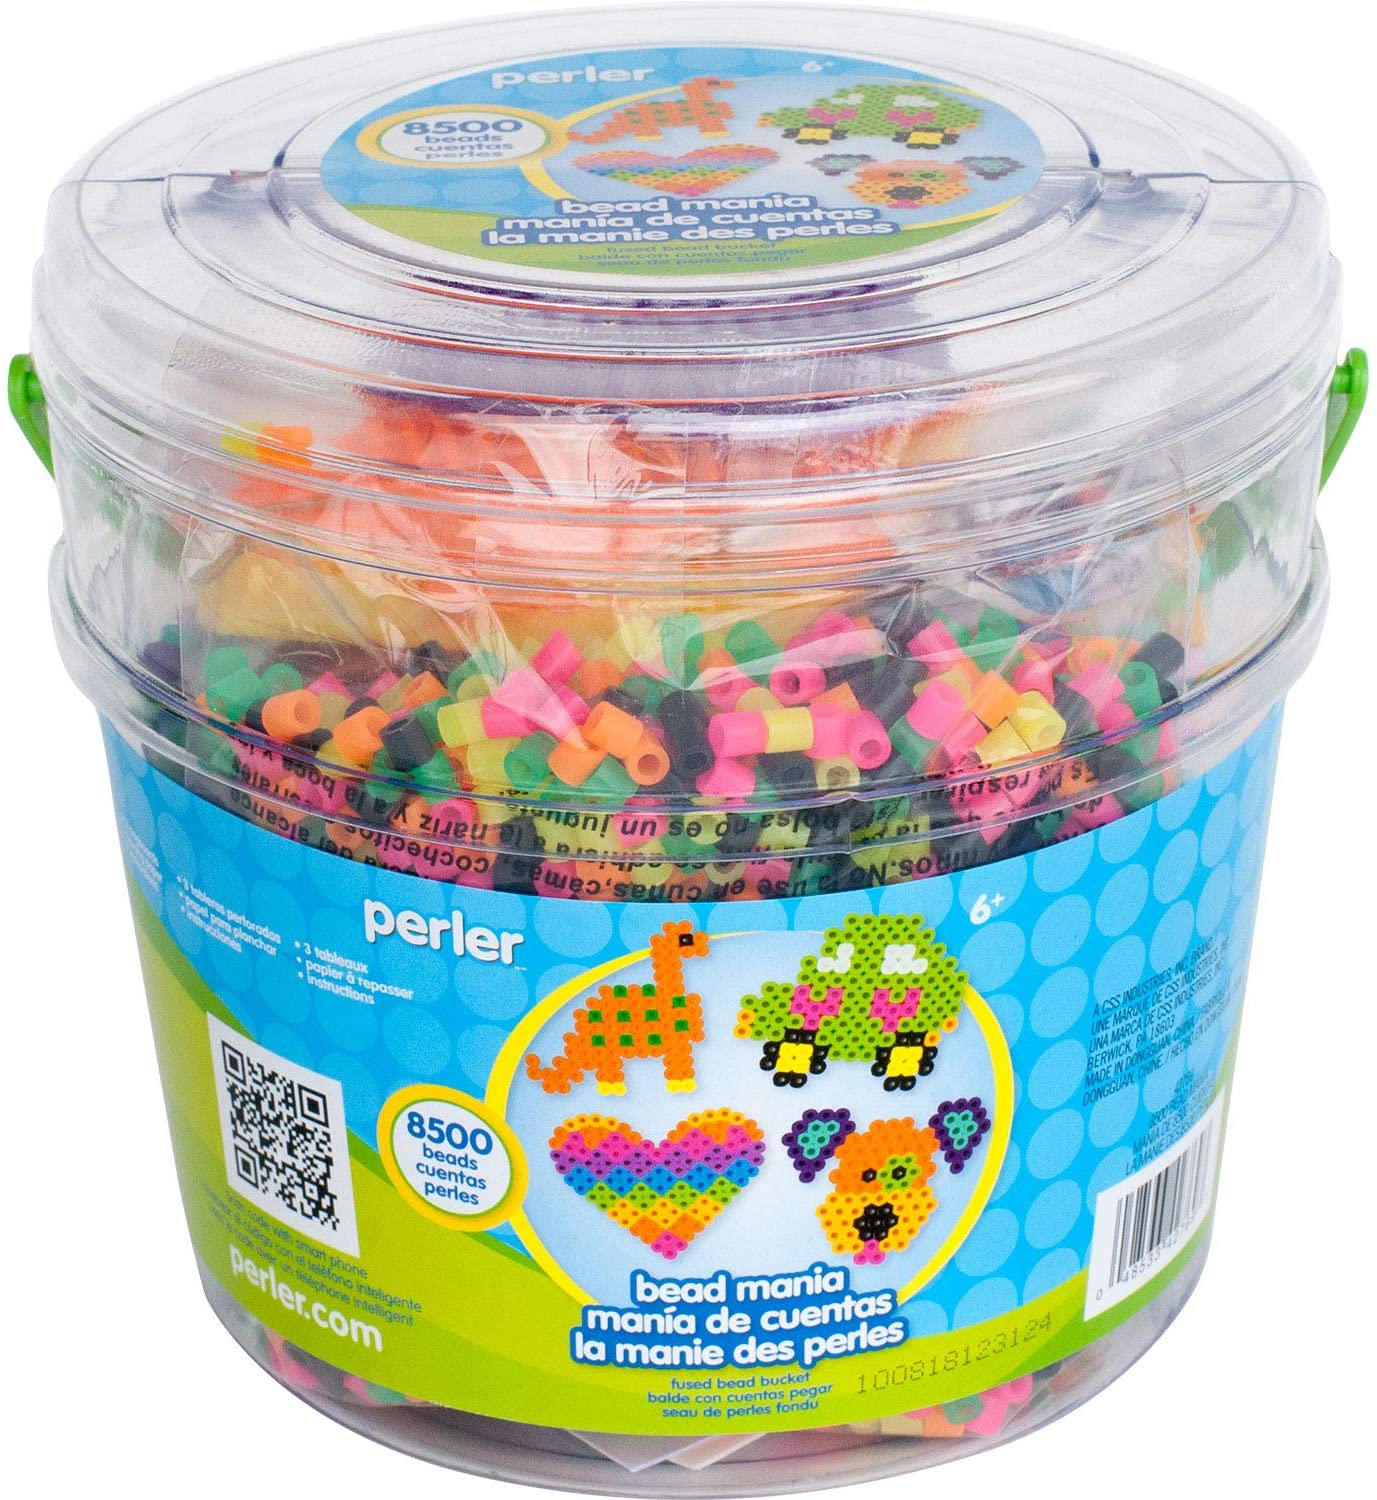 8500-Piece Perler Fuse Activity Bucket for Arts and Crafts $8.62 @ Amazon